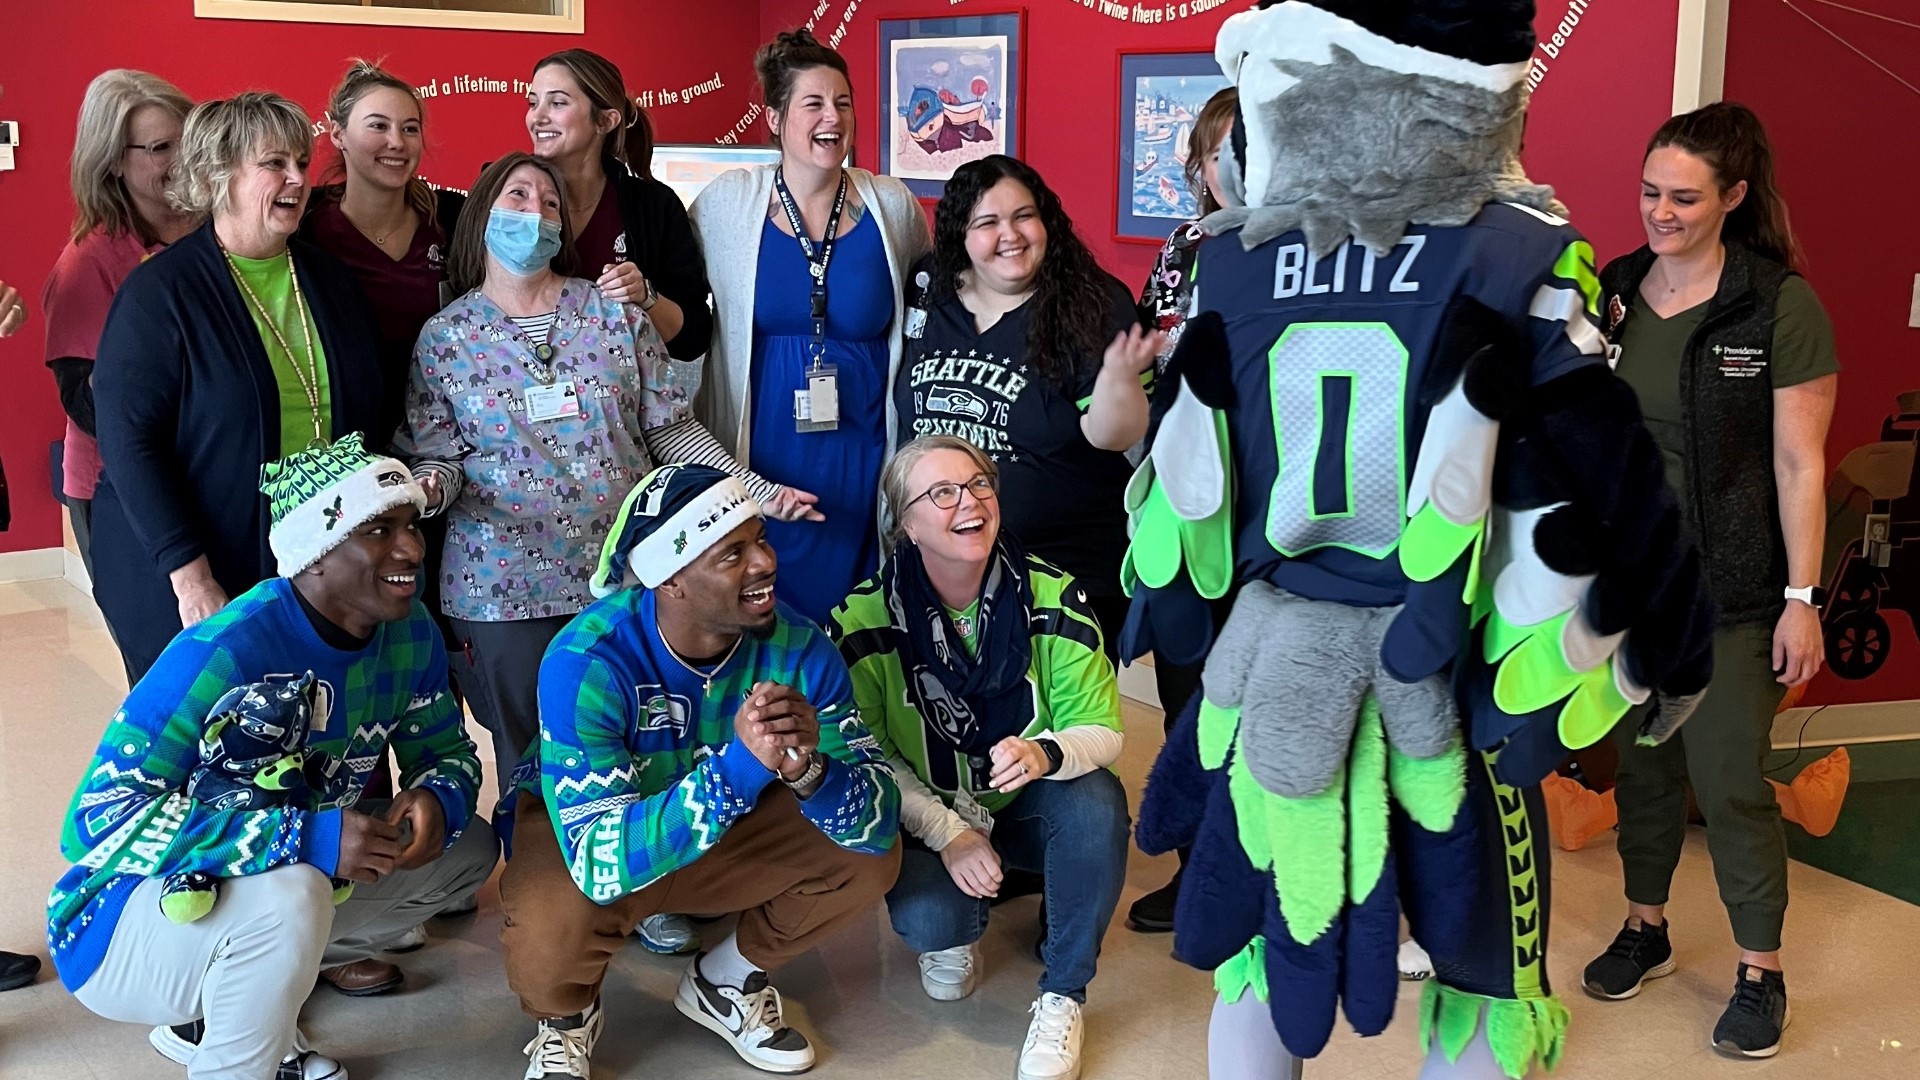 Seattle Seahawks players and mascot Blitz stopped by the children's hospital to bring joy during the holiday season.